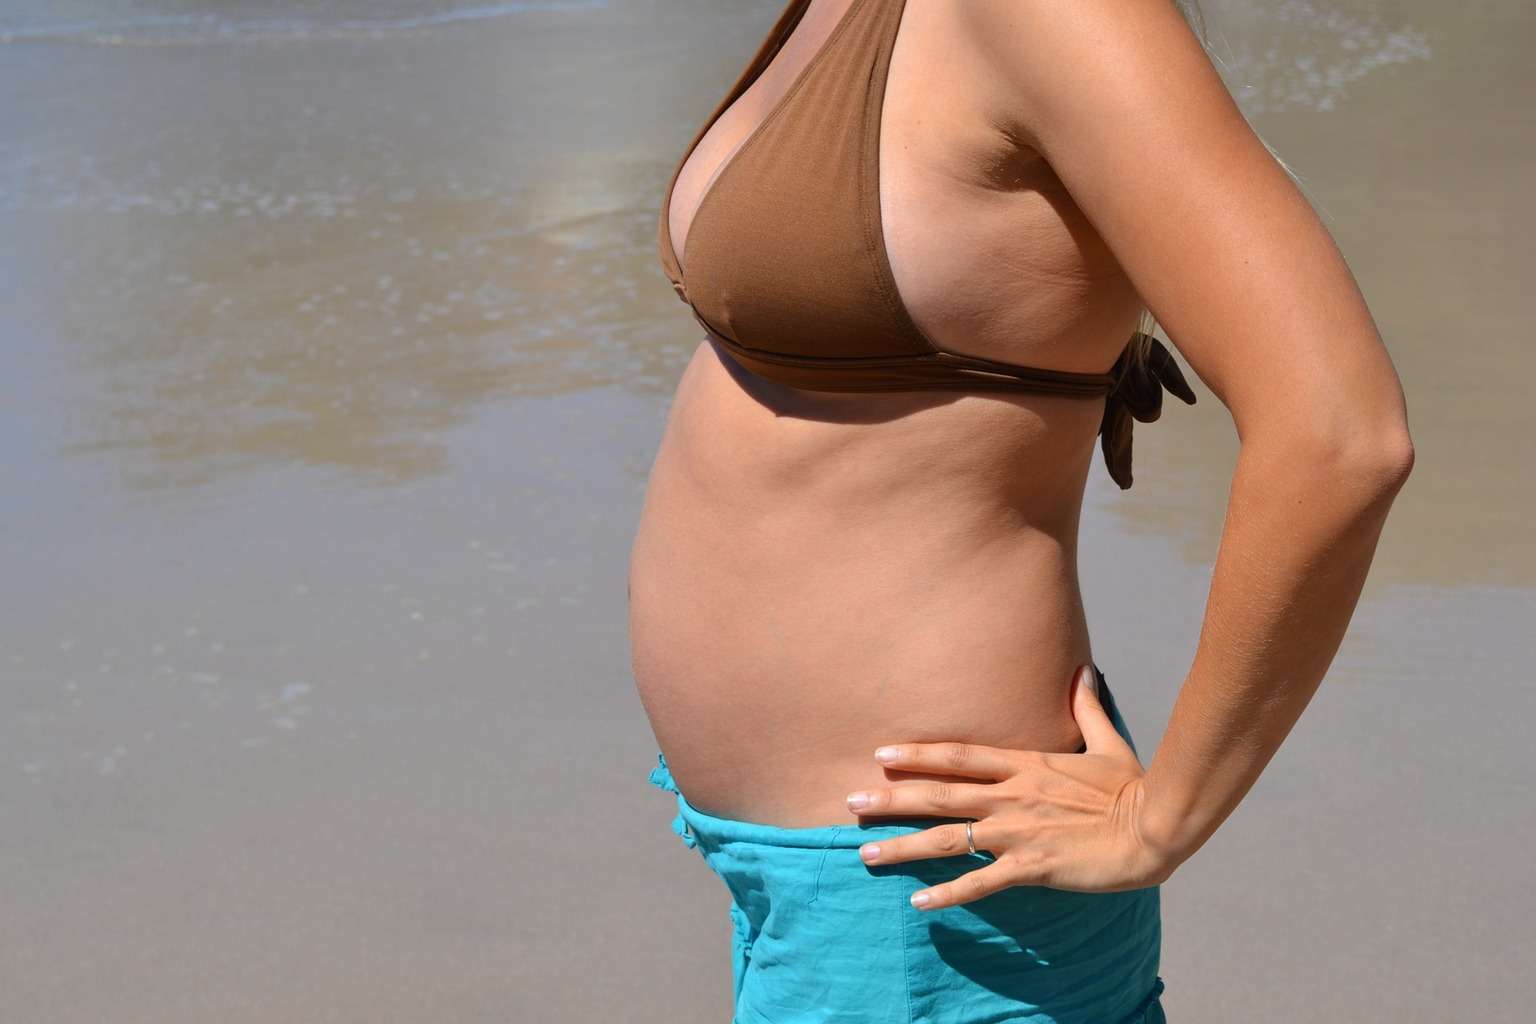 Body Shaming & The Pressure To Be a Yummy Mummy